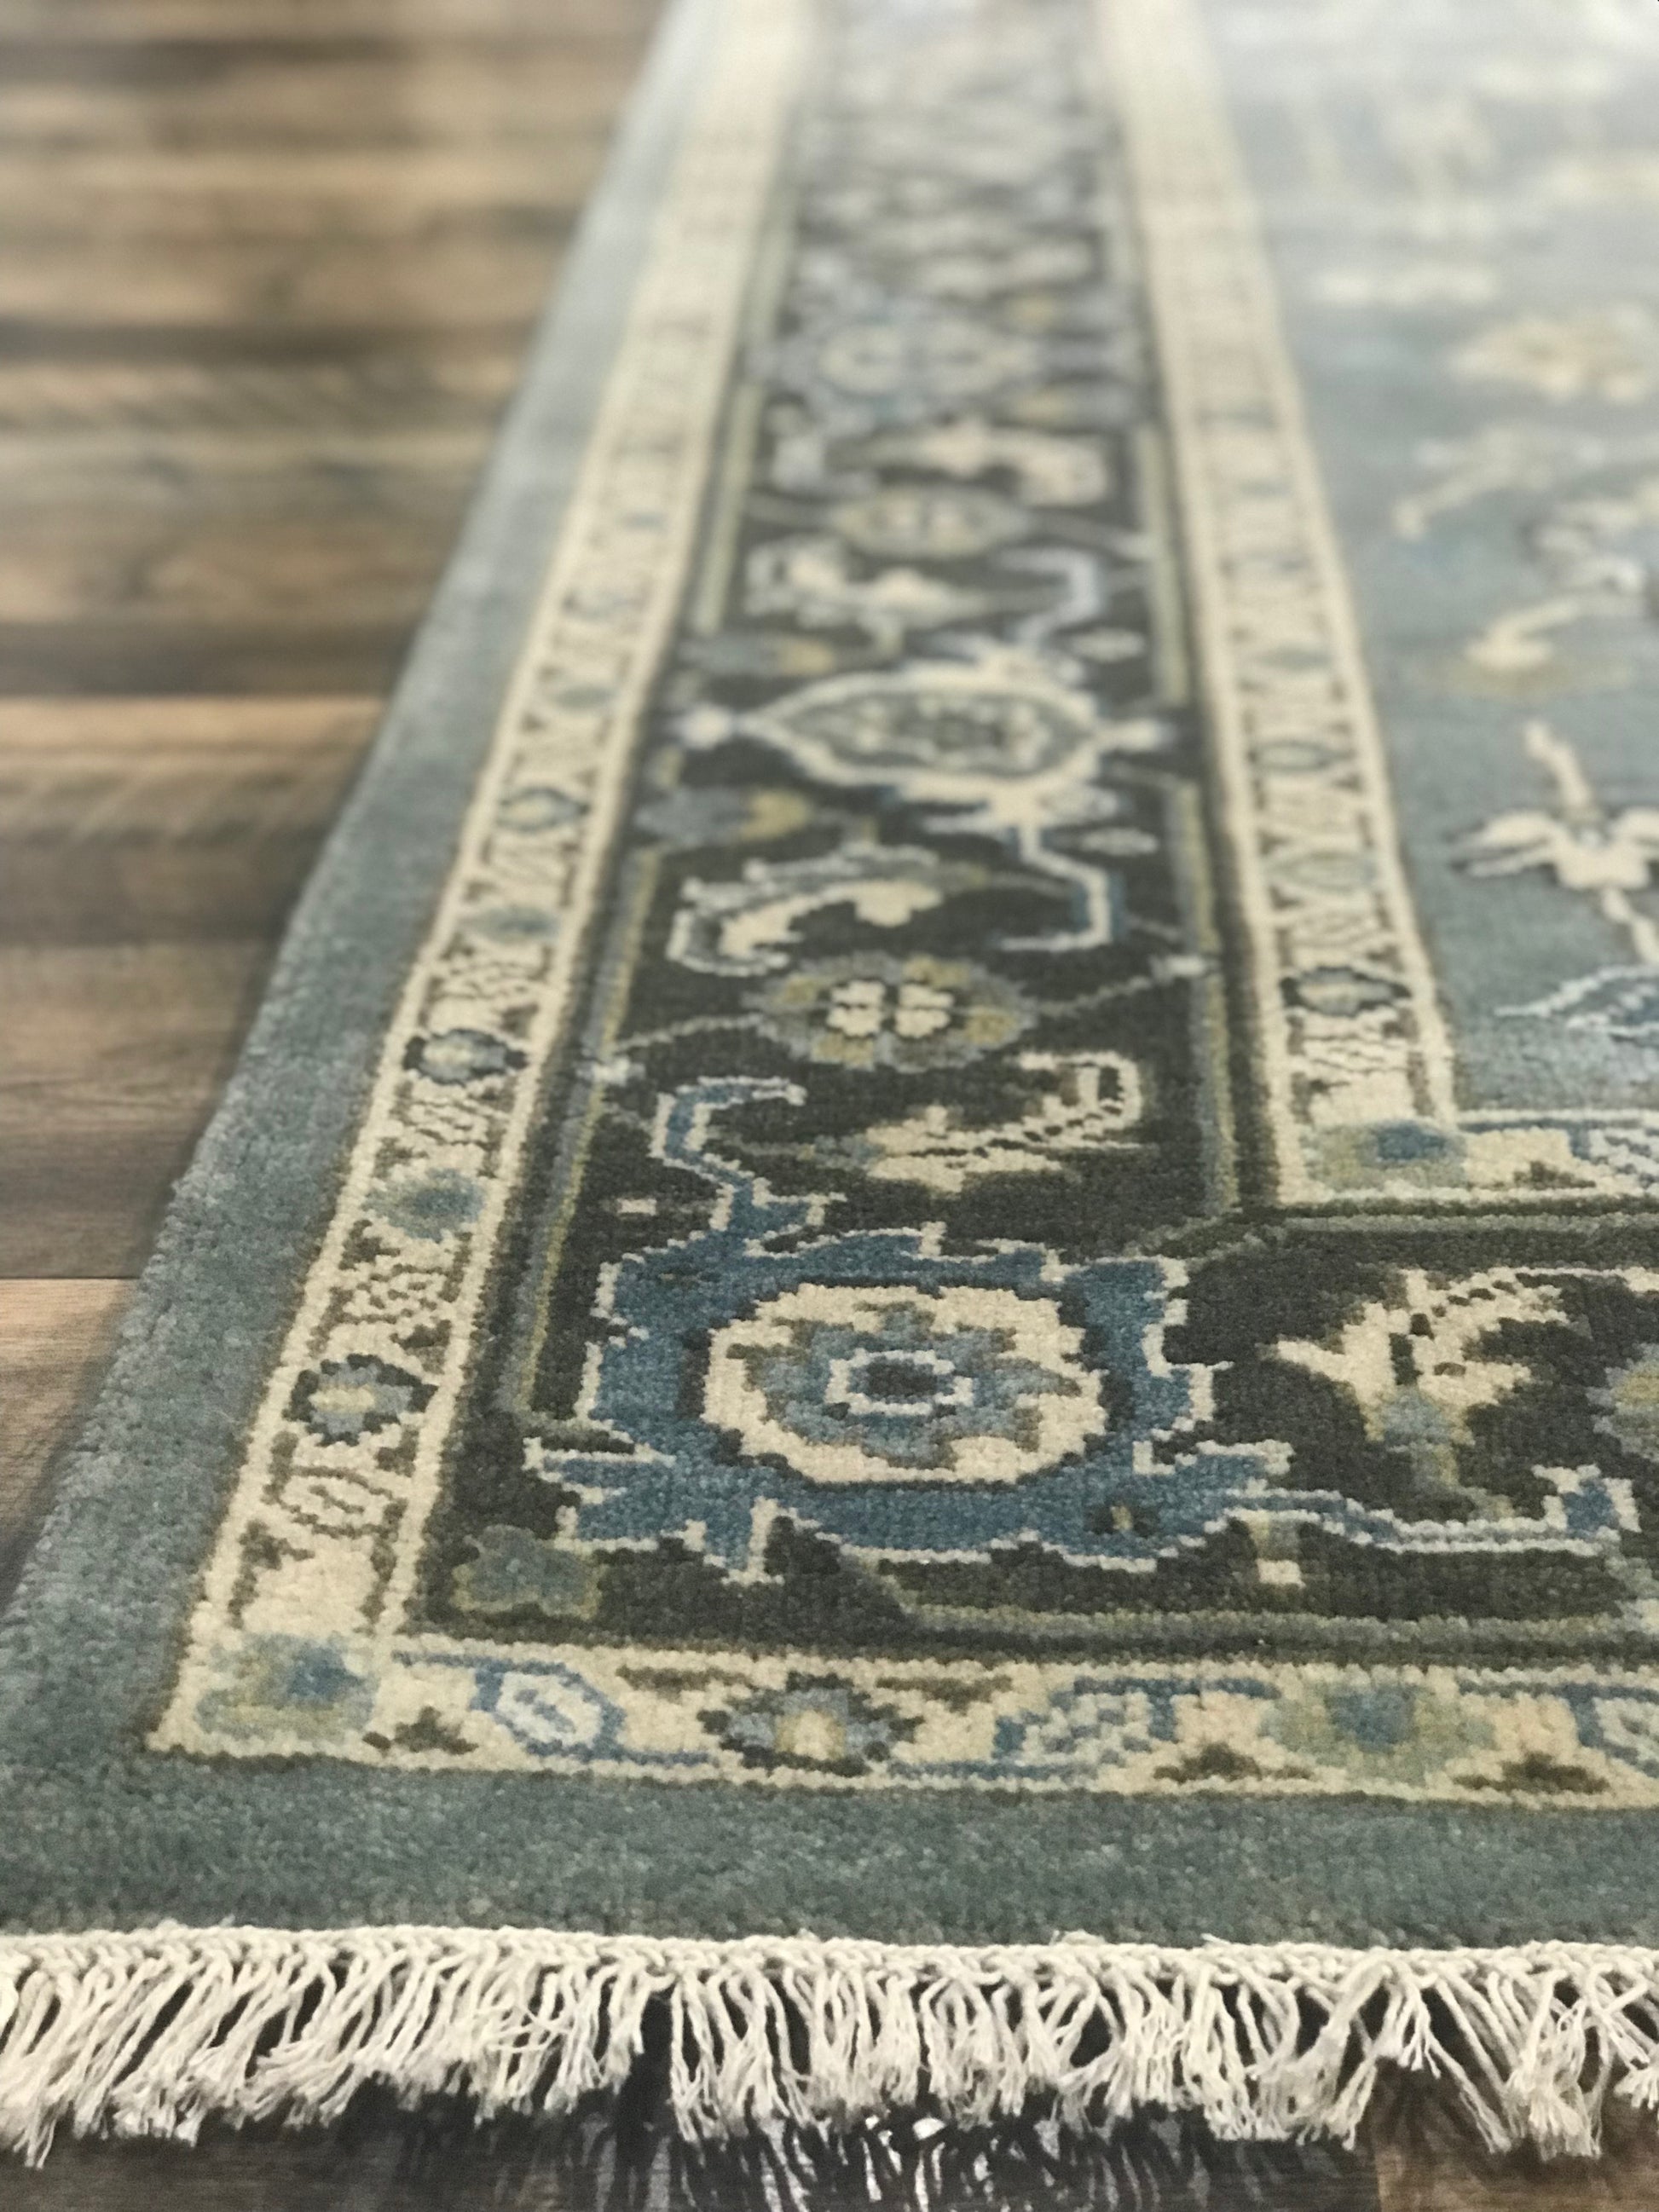 Classique Collection (CL-1) Steel Blue Rug traditional rug online area rug store orange county affordable